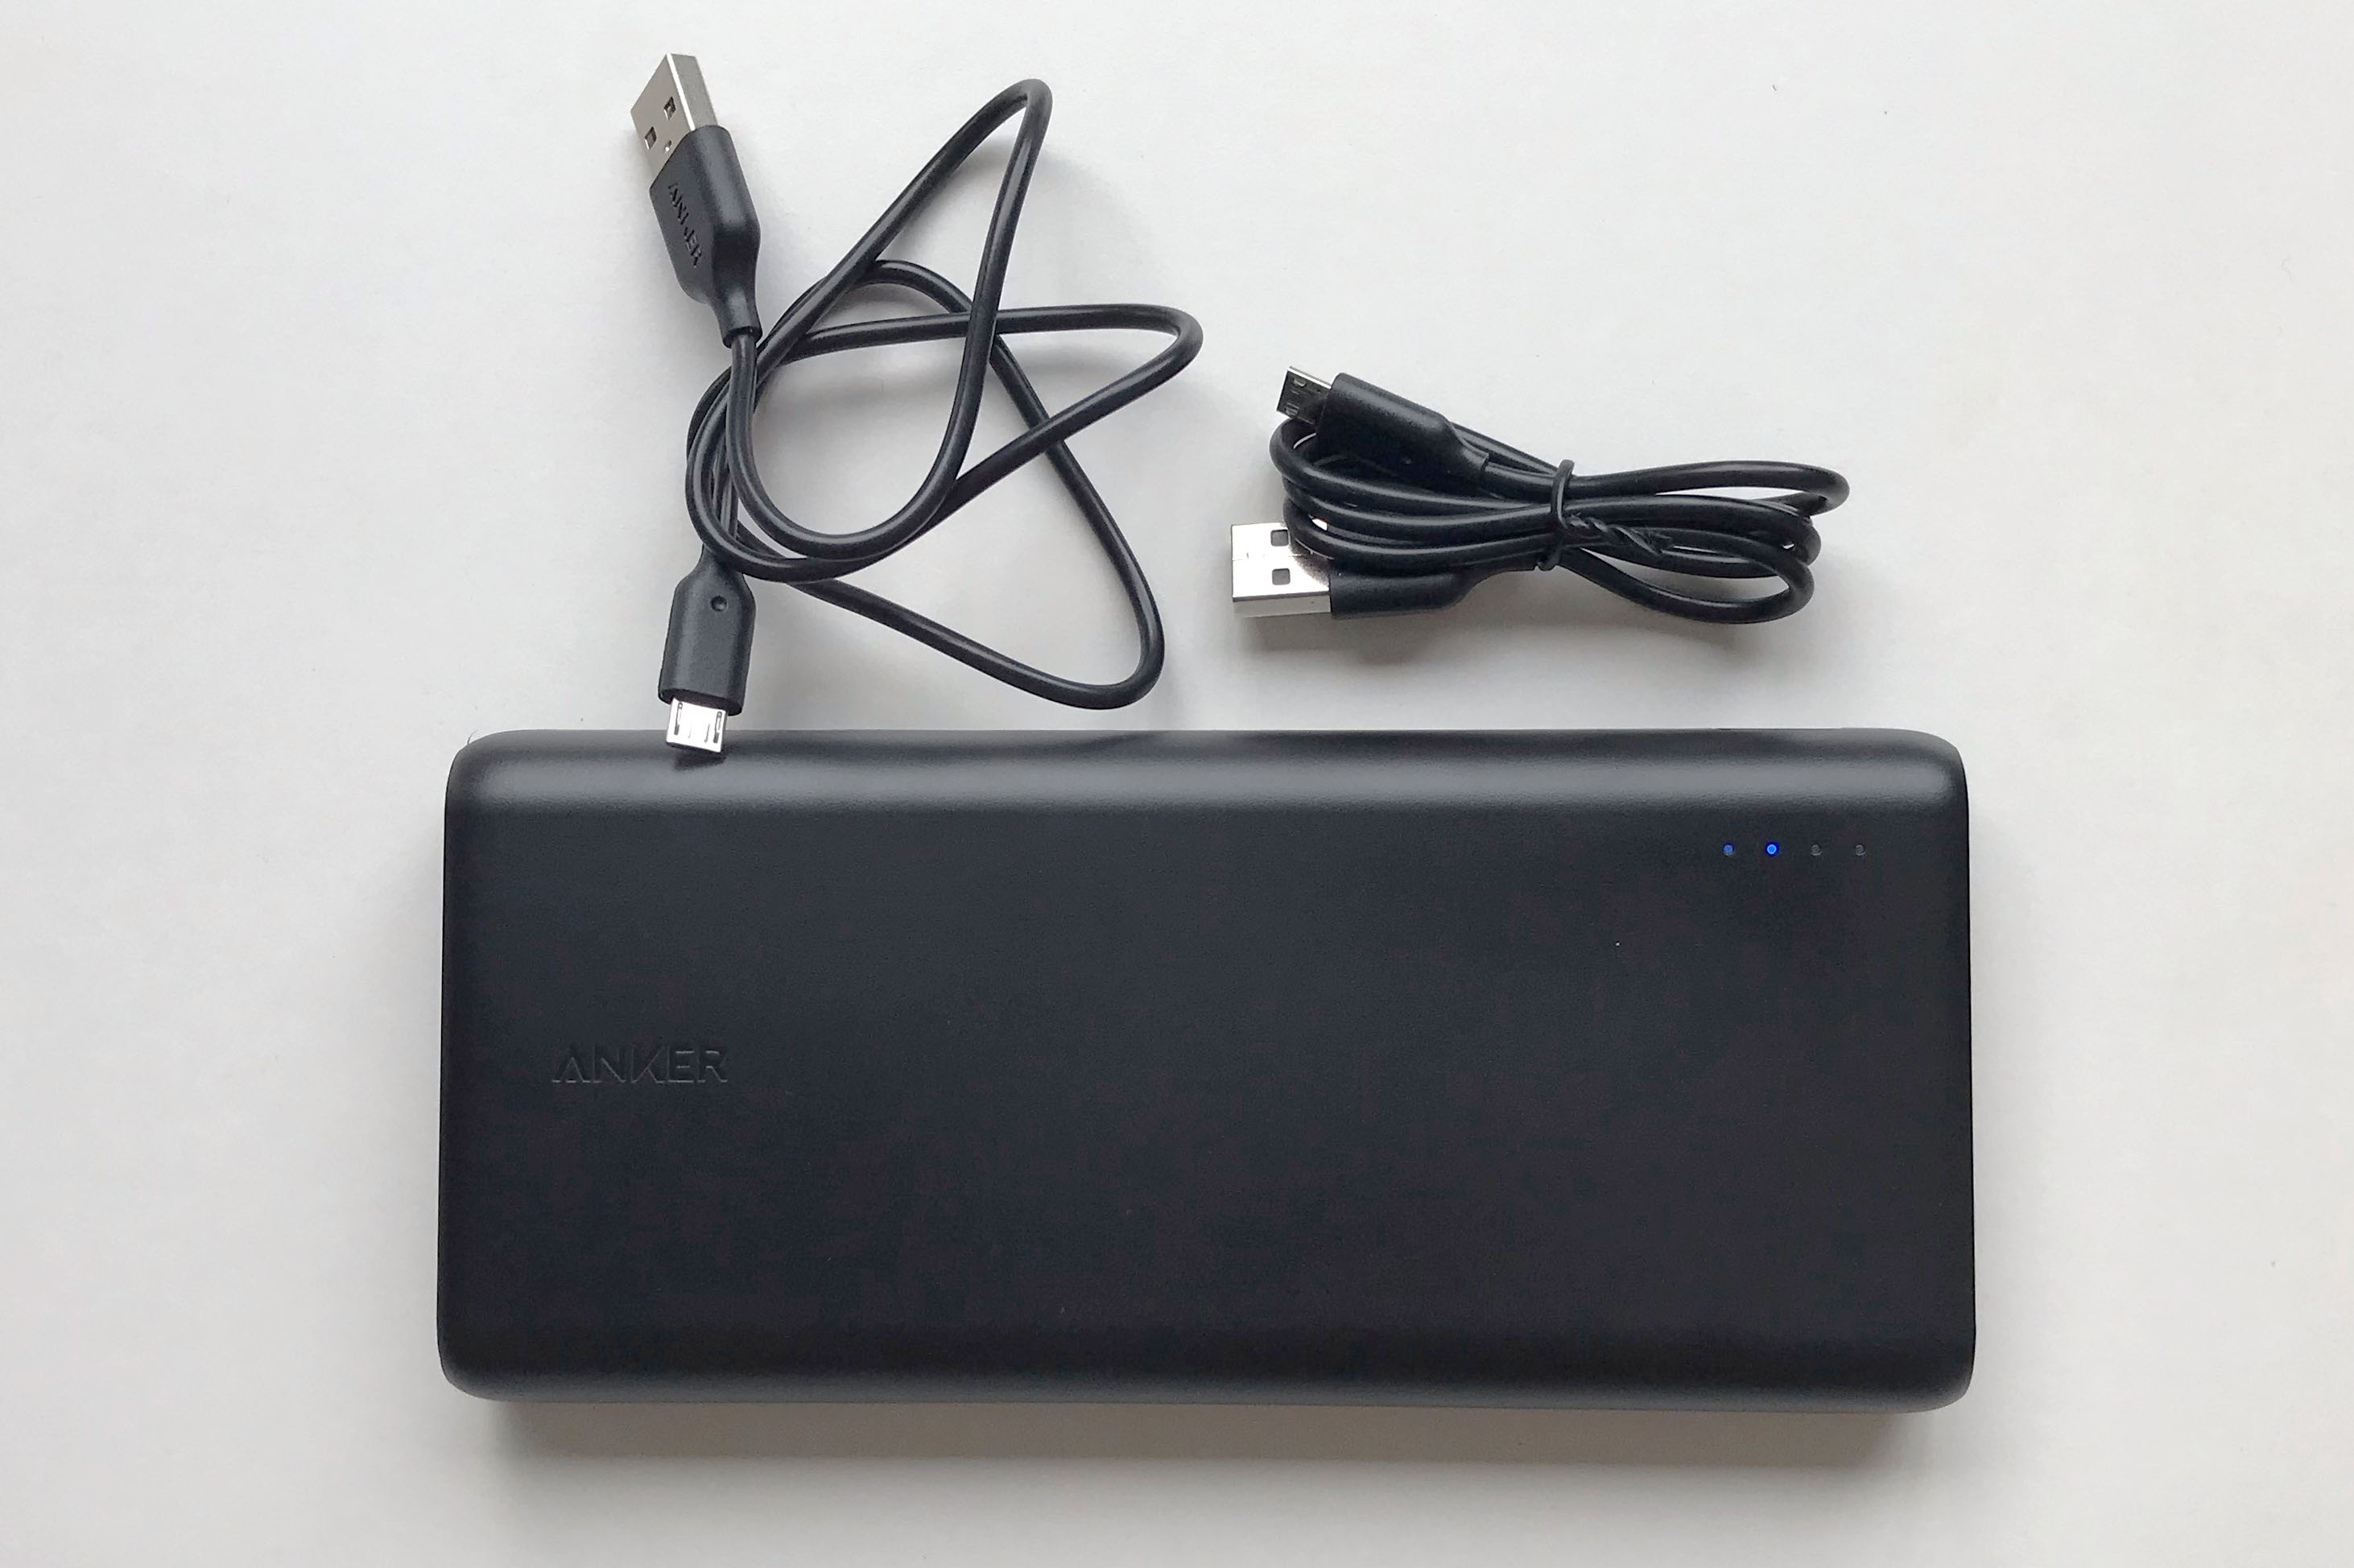 Anker releases a 10,000 mAh portable magnetic battery with